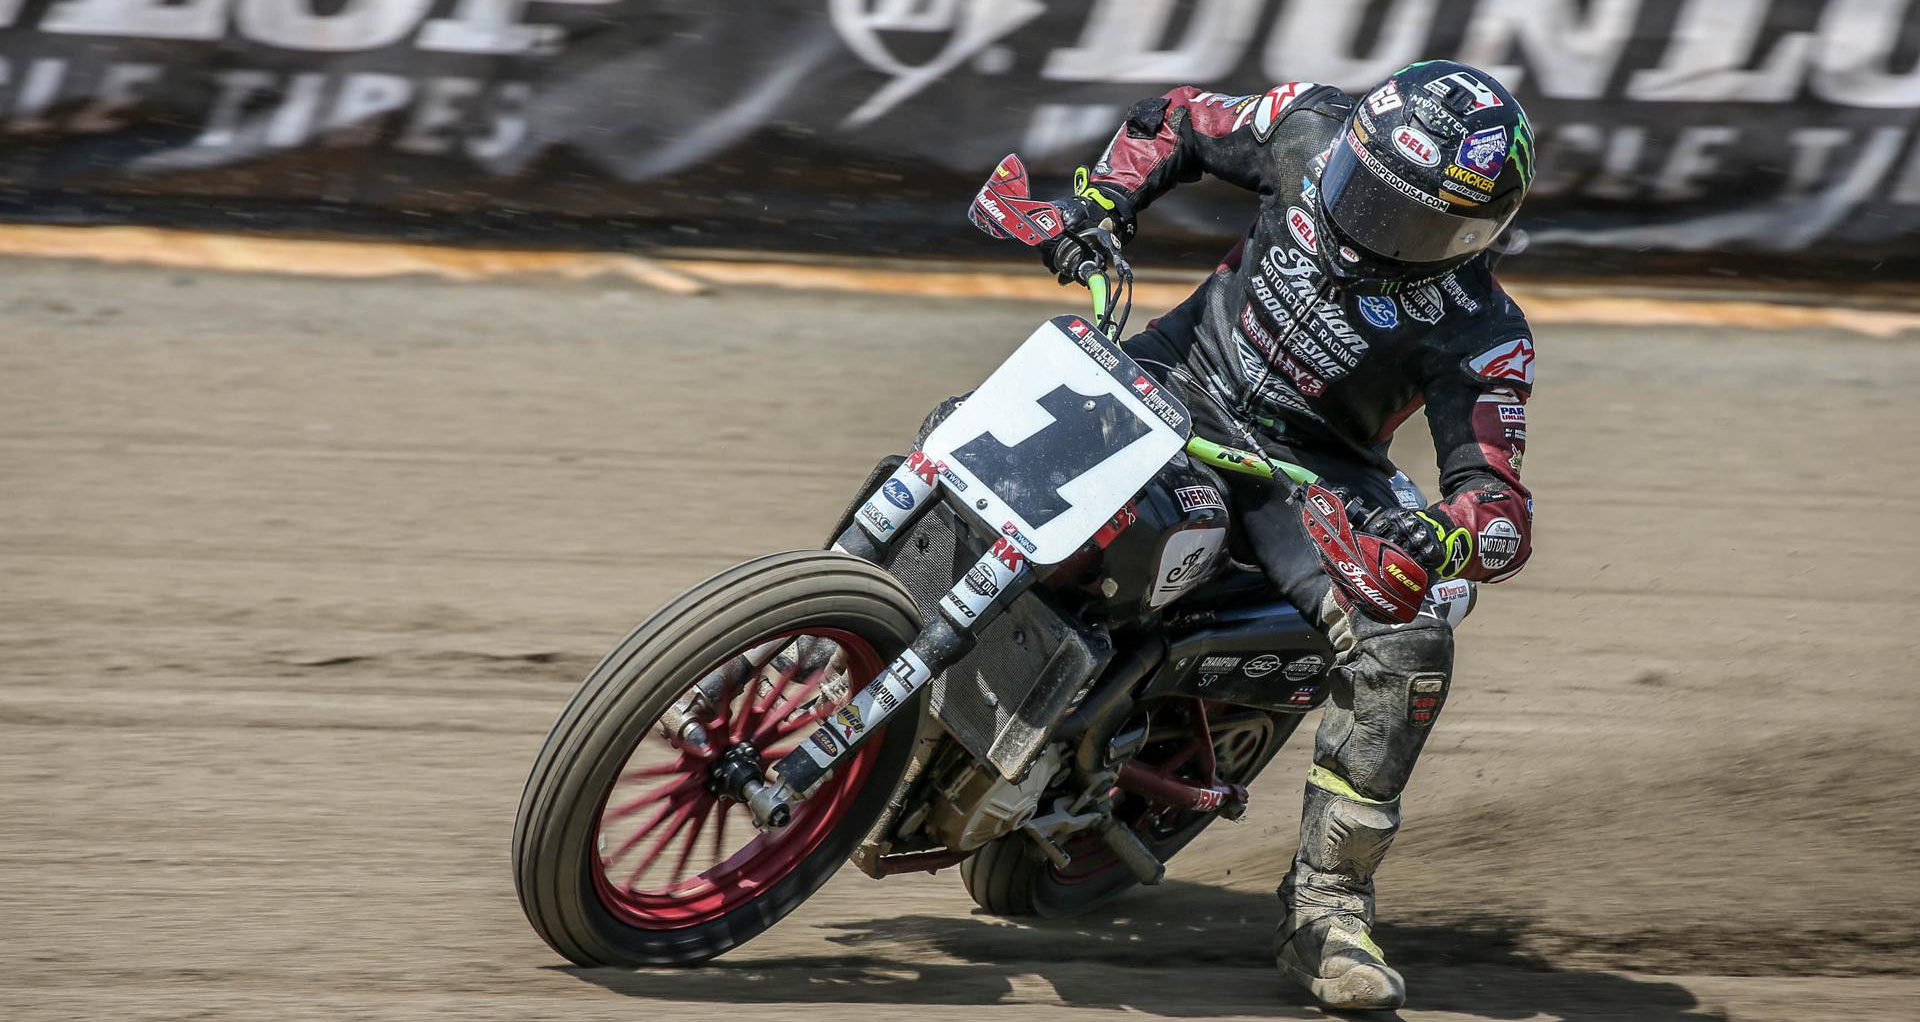 Jared Mees (1) at speed at the Lima Half-Mile in 2019. Photo by Scott Hunter, courtesy AFT.